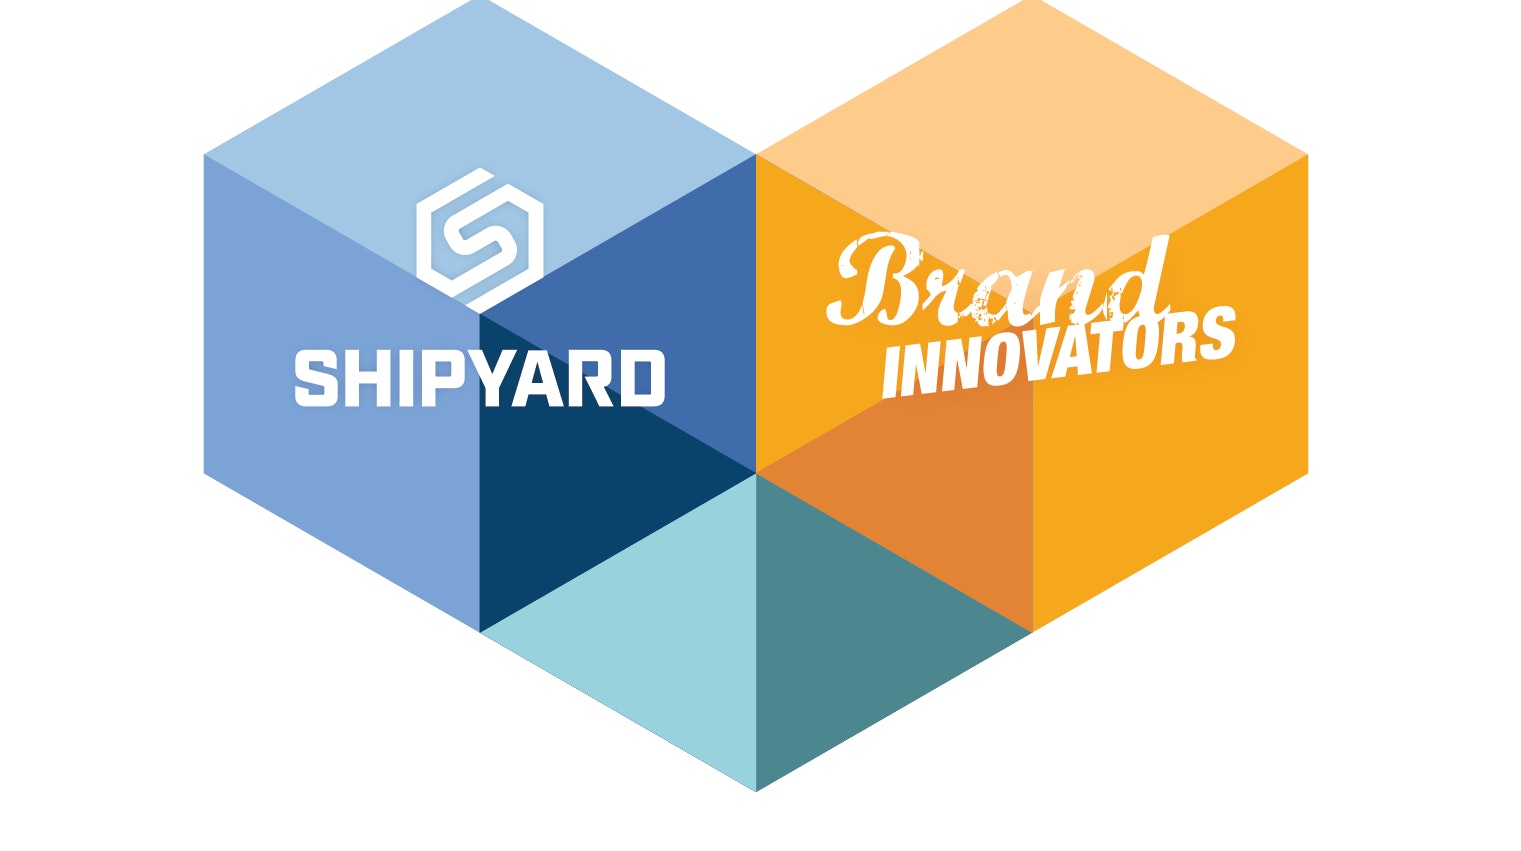 The Shipyard hosted 125 brands at the Engineering Brand Love Summit